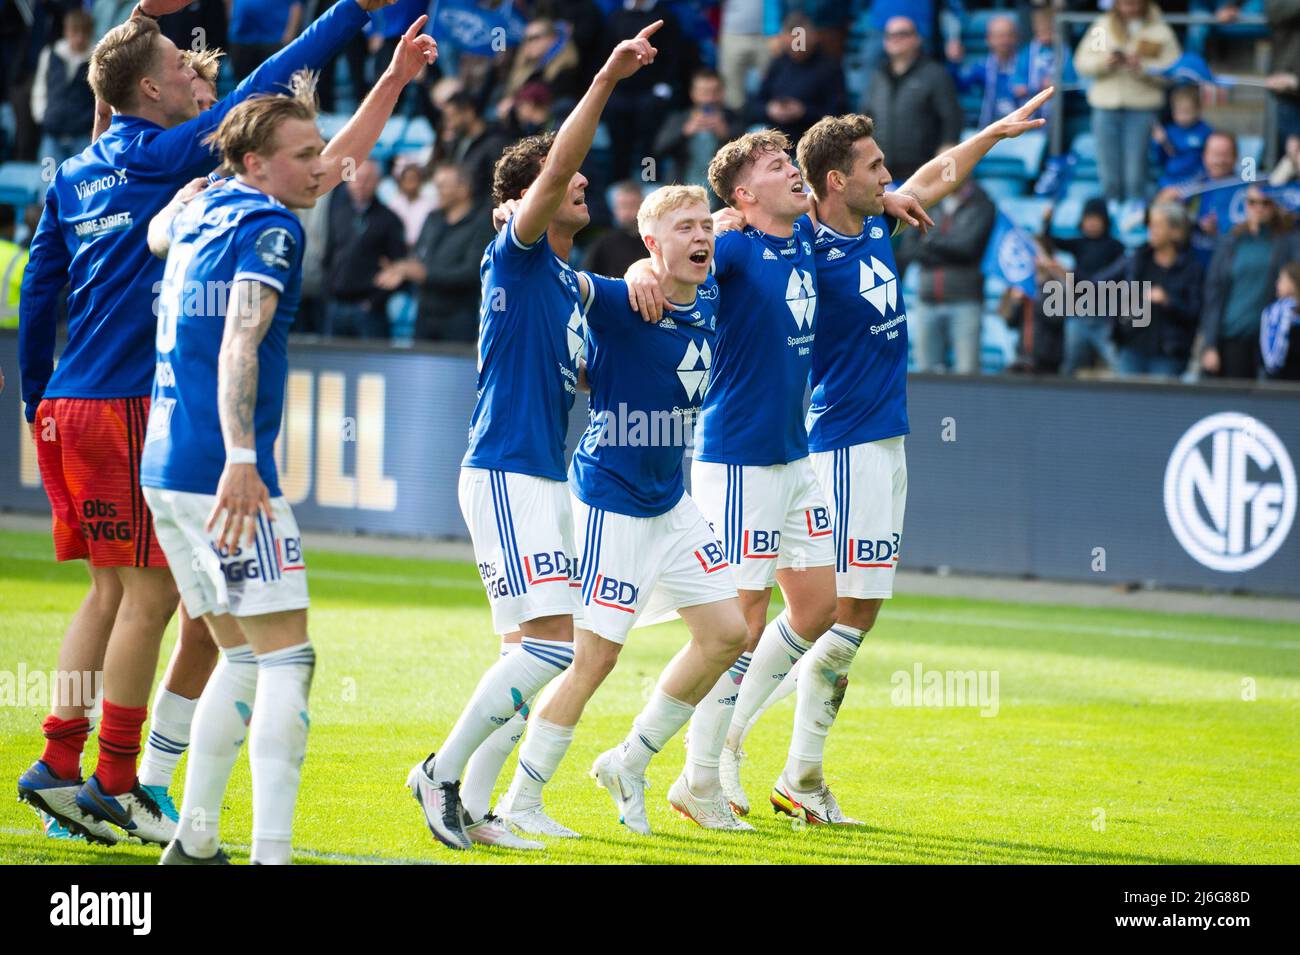 Oslo, Norway. 01st, May 2022. The players of Molde are celebrating winning the Norwegian Cup final, the NM Menn final, between Bodoe/Glimt and Molde at Ullevaal Stadion in Oslo. (Photo credit: Gonzales Photo - Jan-Erik Eriksen). Credit: Gonzales Photo/Alamy Live News Stock Photo